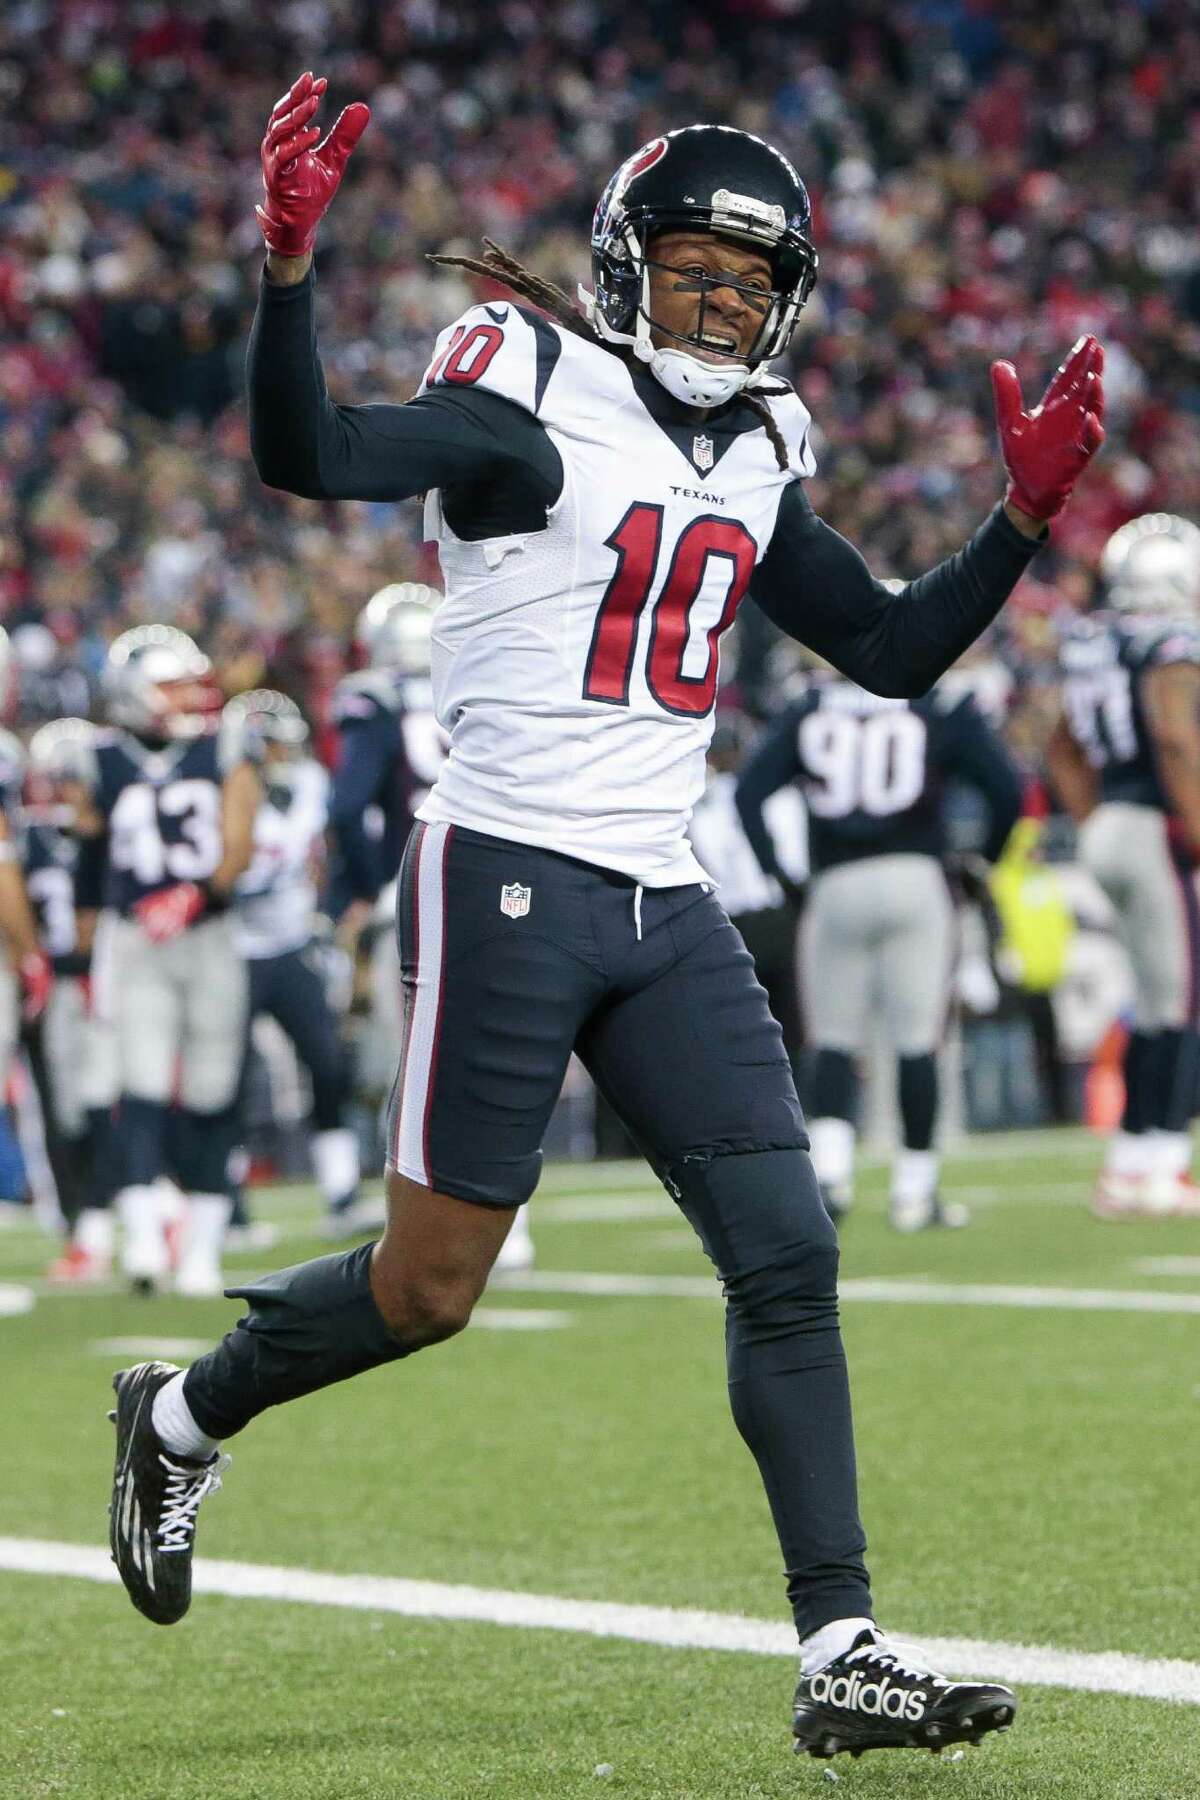 WIDE RECEIVERS The erratic play of Brock Osweiler contributed heavily to DeAndre Hopkins’ catches falling from 111 to 78, yards from 1,521 to 954 and touchdowns from 11 to four. Counting playoffs, 10 of his 18 interceptions came when he was targeting Hopkins, who’s expected to sign an extension. The Texans decided to go young at receiver, and they paid a price. Will Fuller had 47 catches for 635 yards and two touchdowns. He also had too many drops. Braxton Miller’s rookie season was a learning experience, ending prematurely on injured reserve. He’ll get better because he played receiver only one season in college. At least statistically, Keith Mumphery didn’t show much improvement in his second season. Fuller and Miller should improve in their second seasons, but they might want to sign a veteran to add to this mix. Secure: Hopkins, Fuller, Miller On the bubble: Mumphery, Jaelen Strong, Wendall Williams Free agents: None